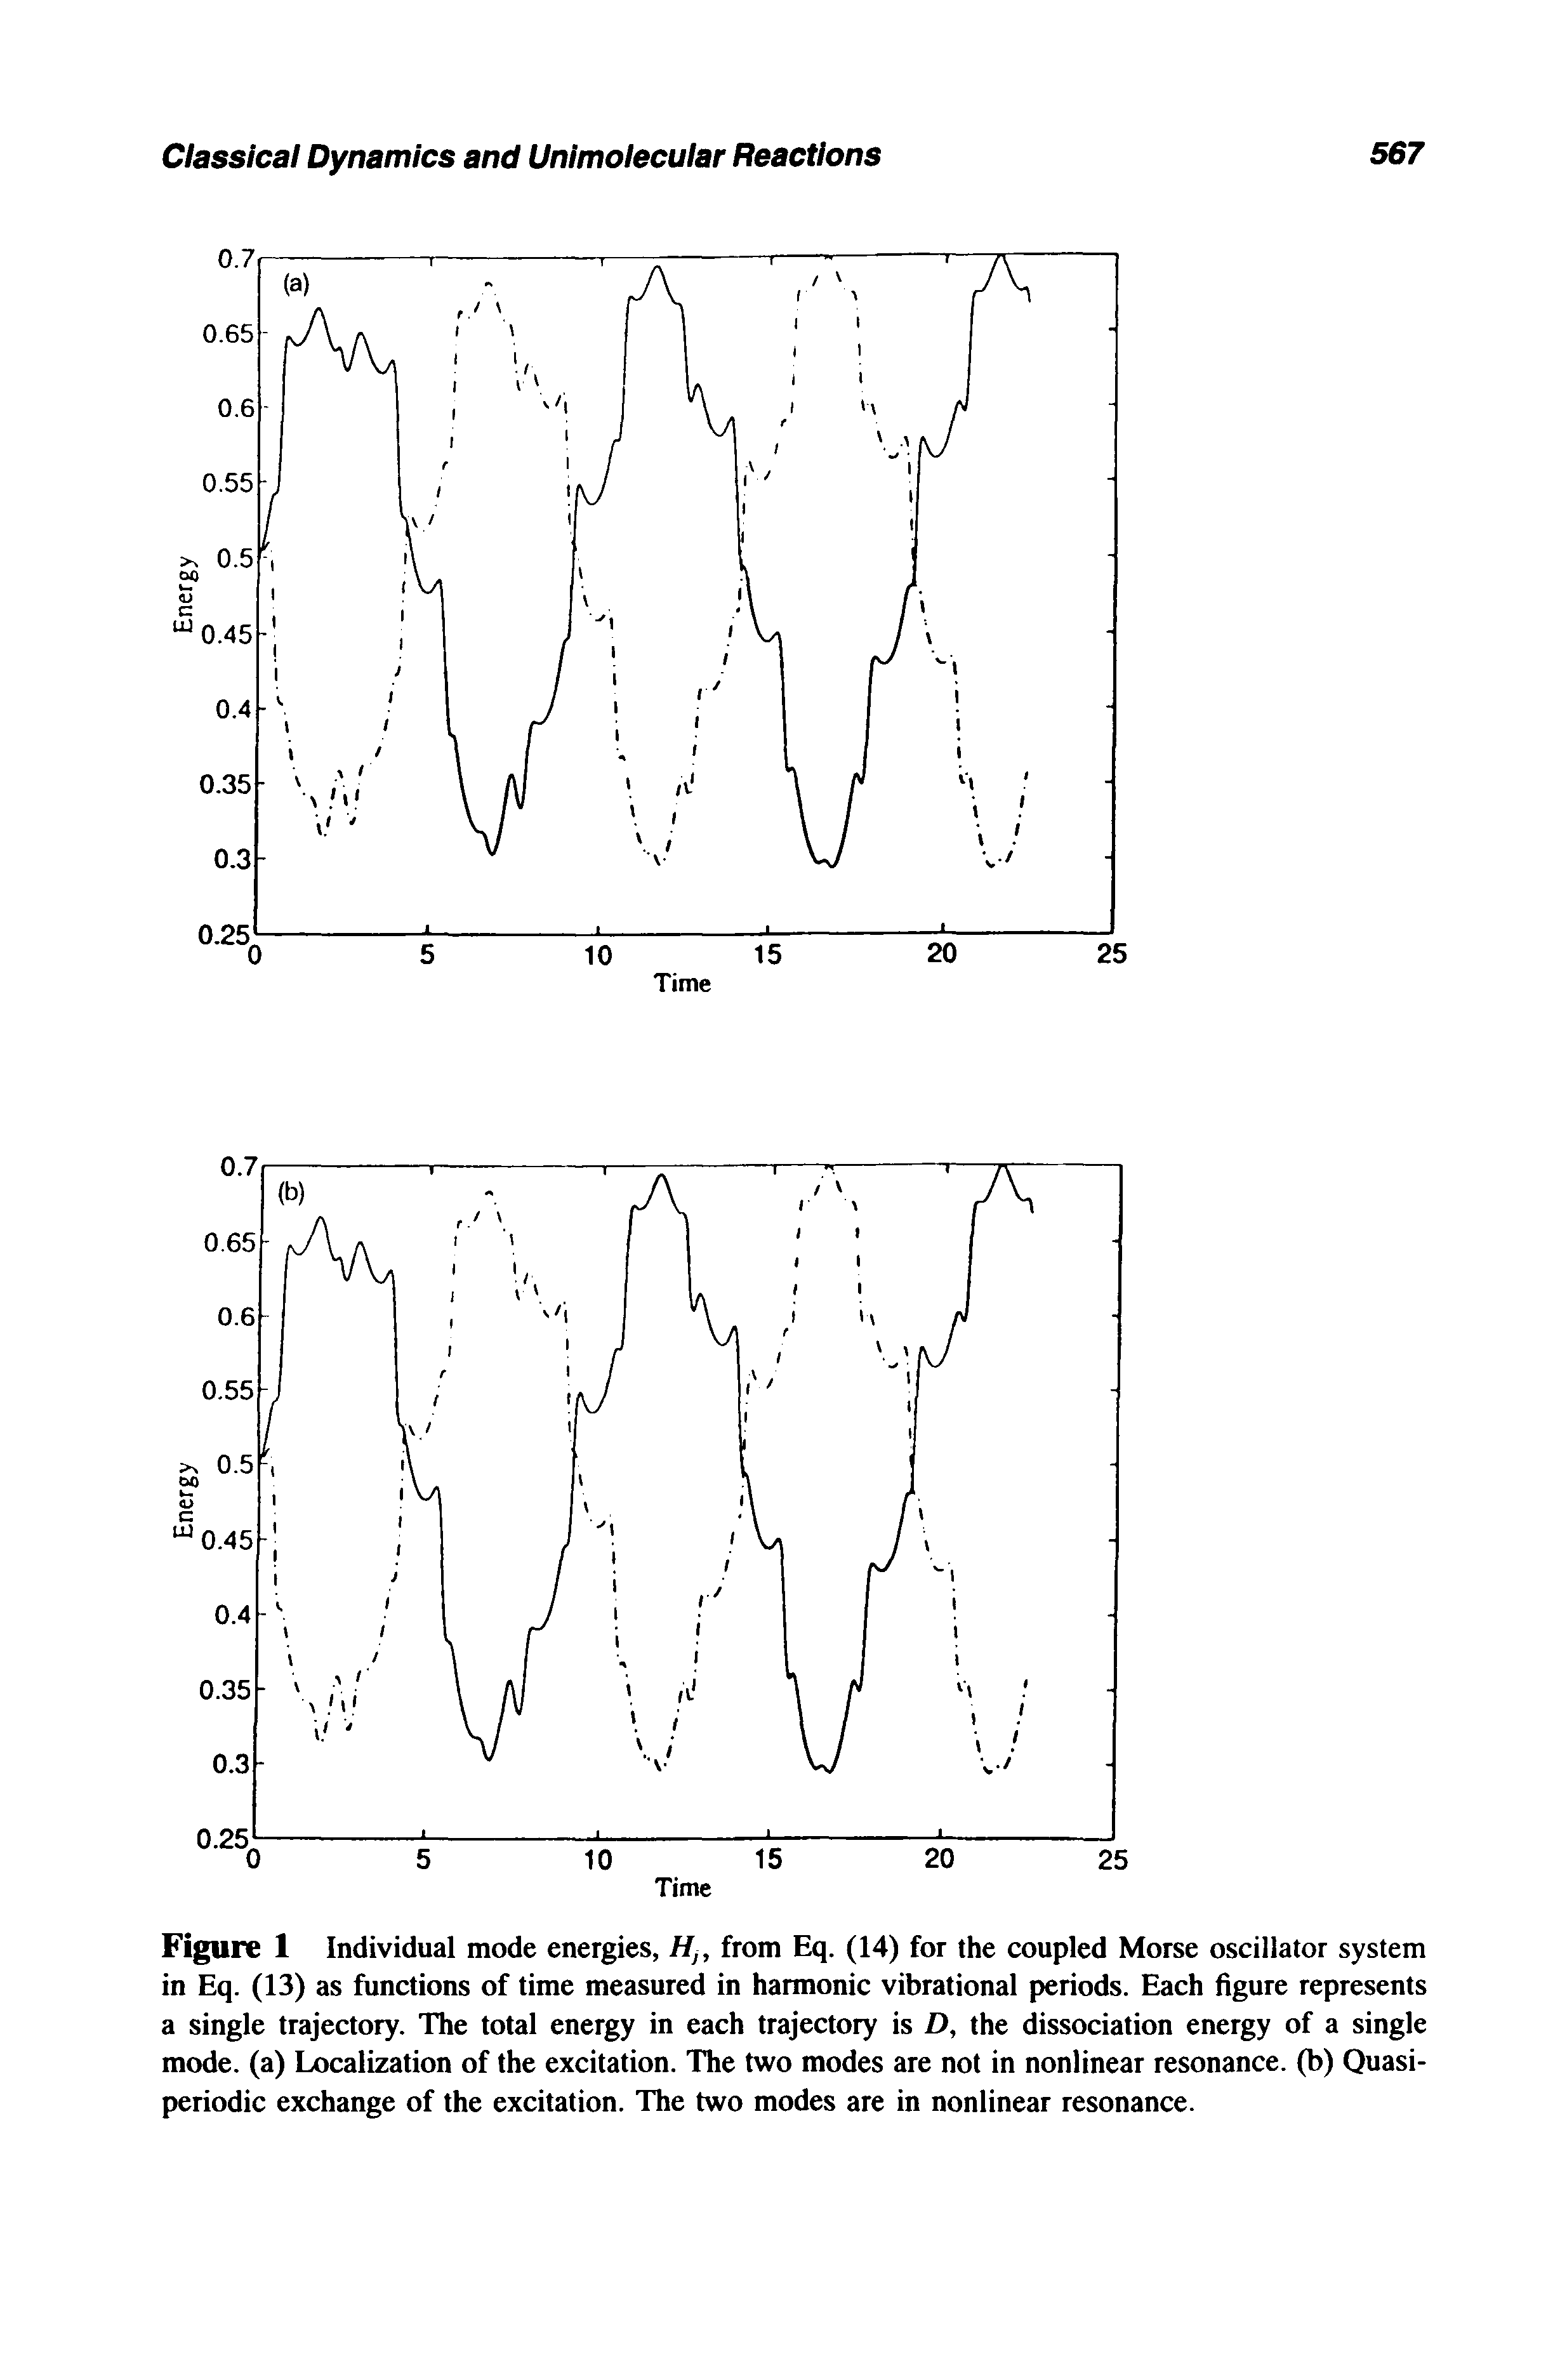 Figure 1 Individual mode energies, Hn from Eq. (14) for the coupled Morse oscillator system in Eq. (13) as functions of time measured in harmonic vibrational periods. Each figure represents a single trajectory. The total energy in each trajectory is D, the dissociation energy of a single mode, (a) Localization of the excitation. The two modes are not in nonlinear resonance, (b) Quasi-periodic exchange of the excitation. The two modes are in nonlinear resonance.